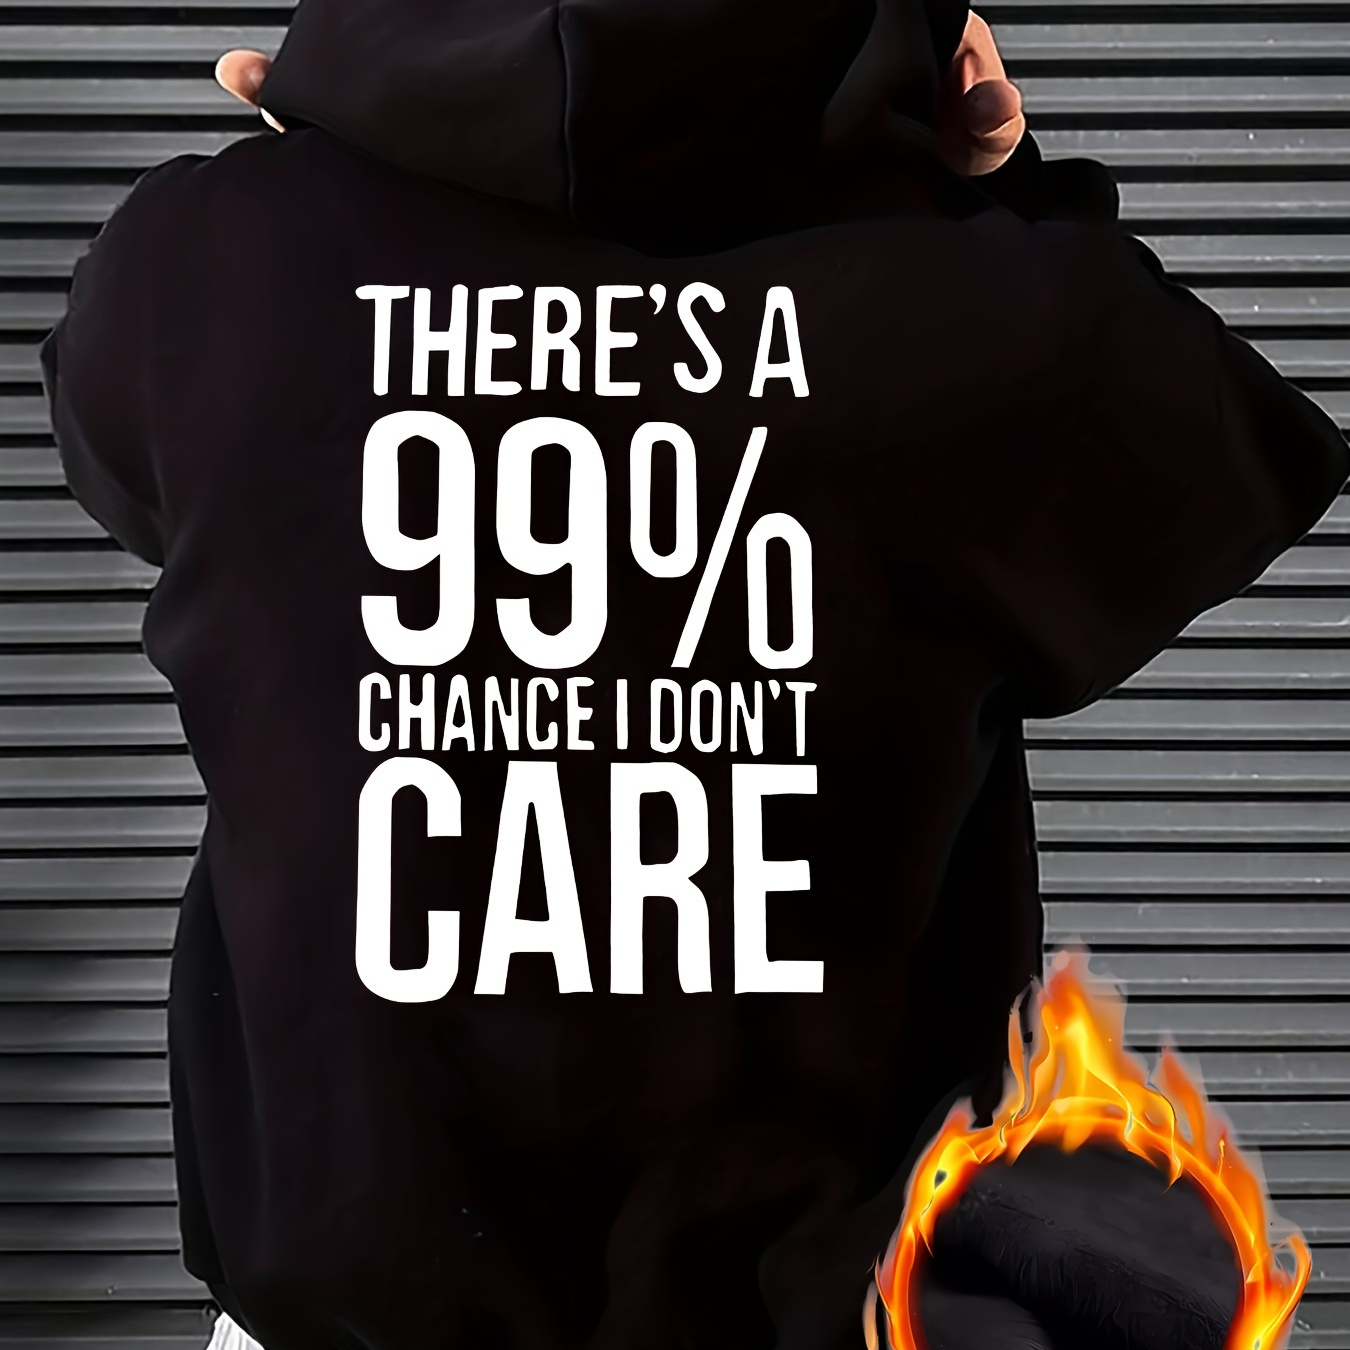 

i Don't Care" Print Warm Hoodie With Kangaroo Pocket, Men's Casual Pullover Hooded Sweatshirt